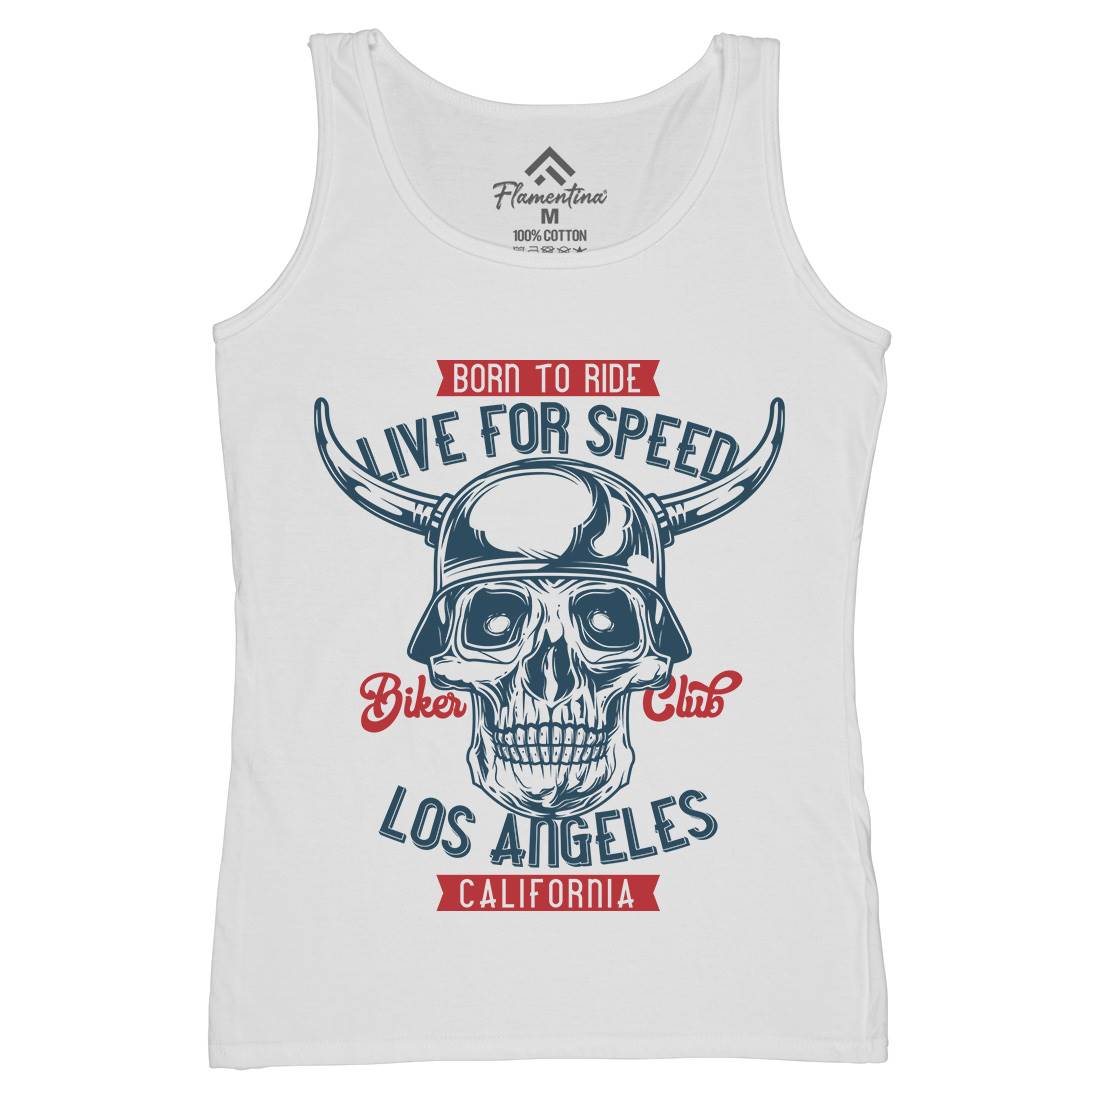 Live For Speed Womens Organic Tank Top Vest Motorcycles B851